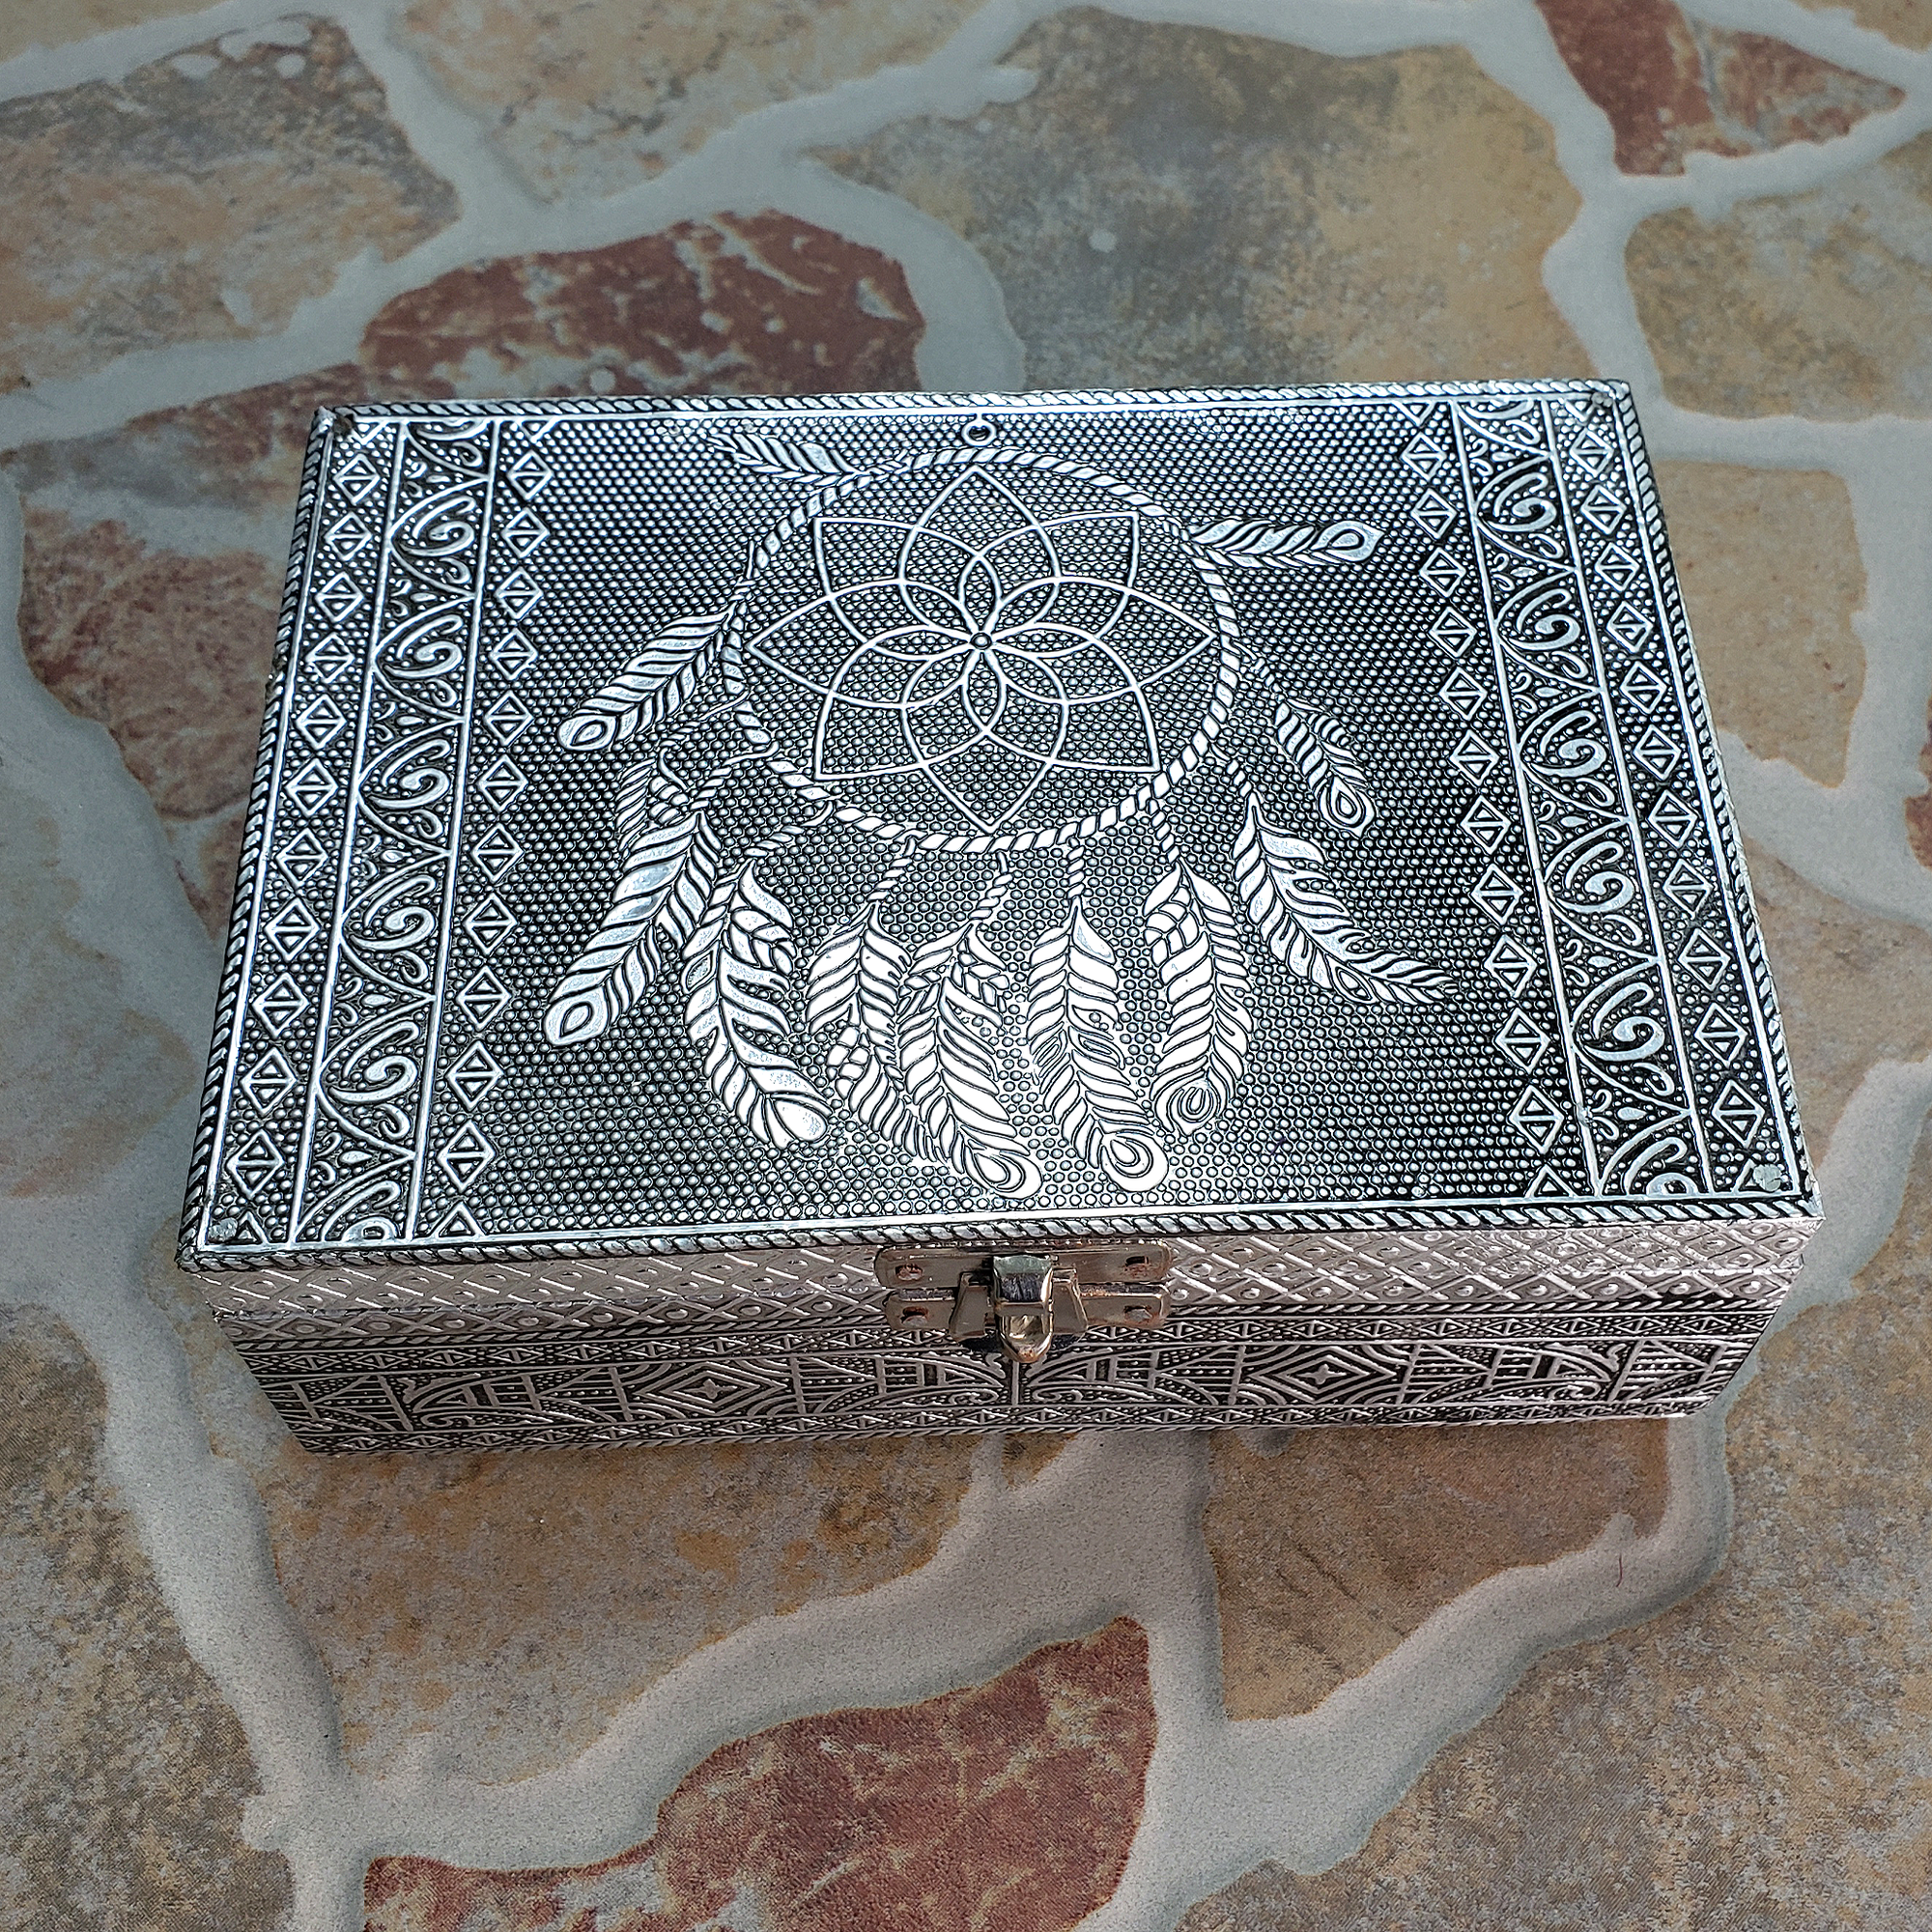 Dreamcatcher Embossed Metal Over Wooden Decorative Storage Box - 6.75 x 4.75 inches